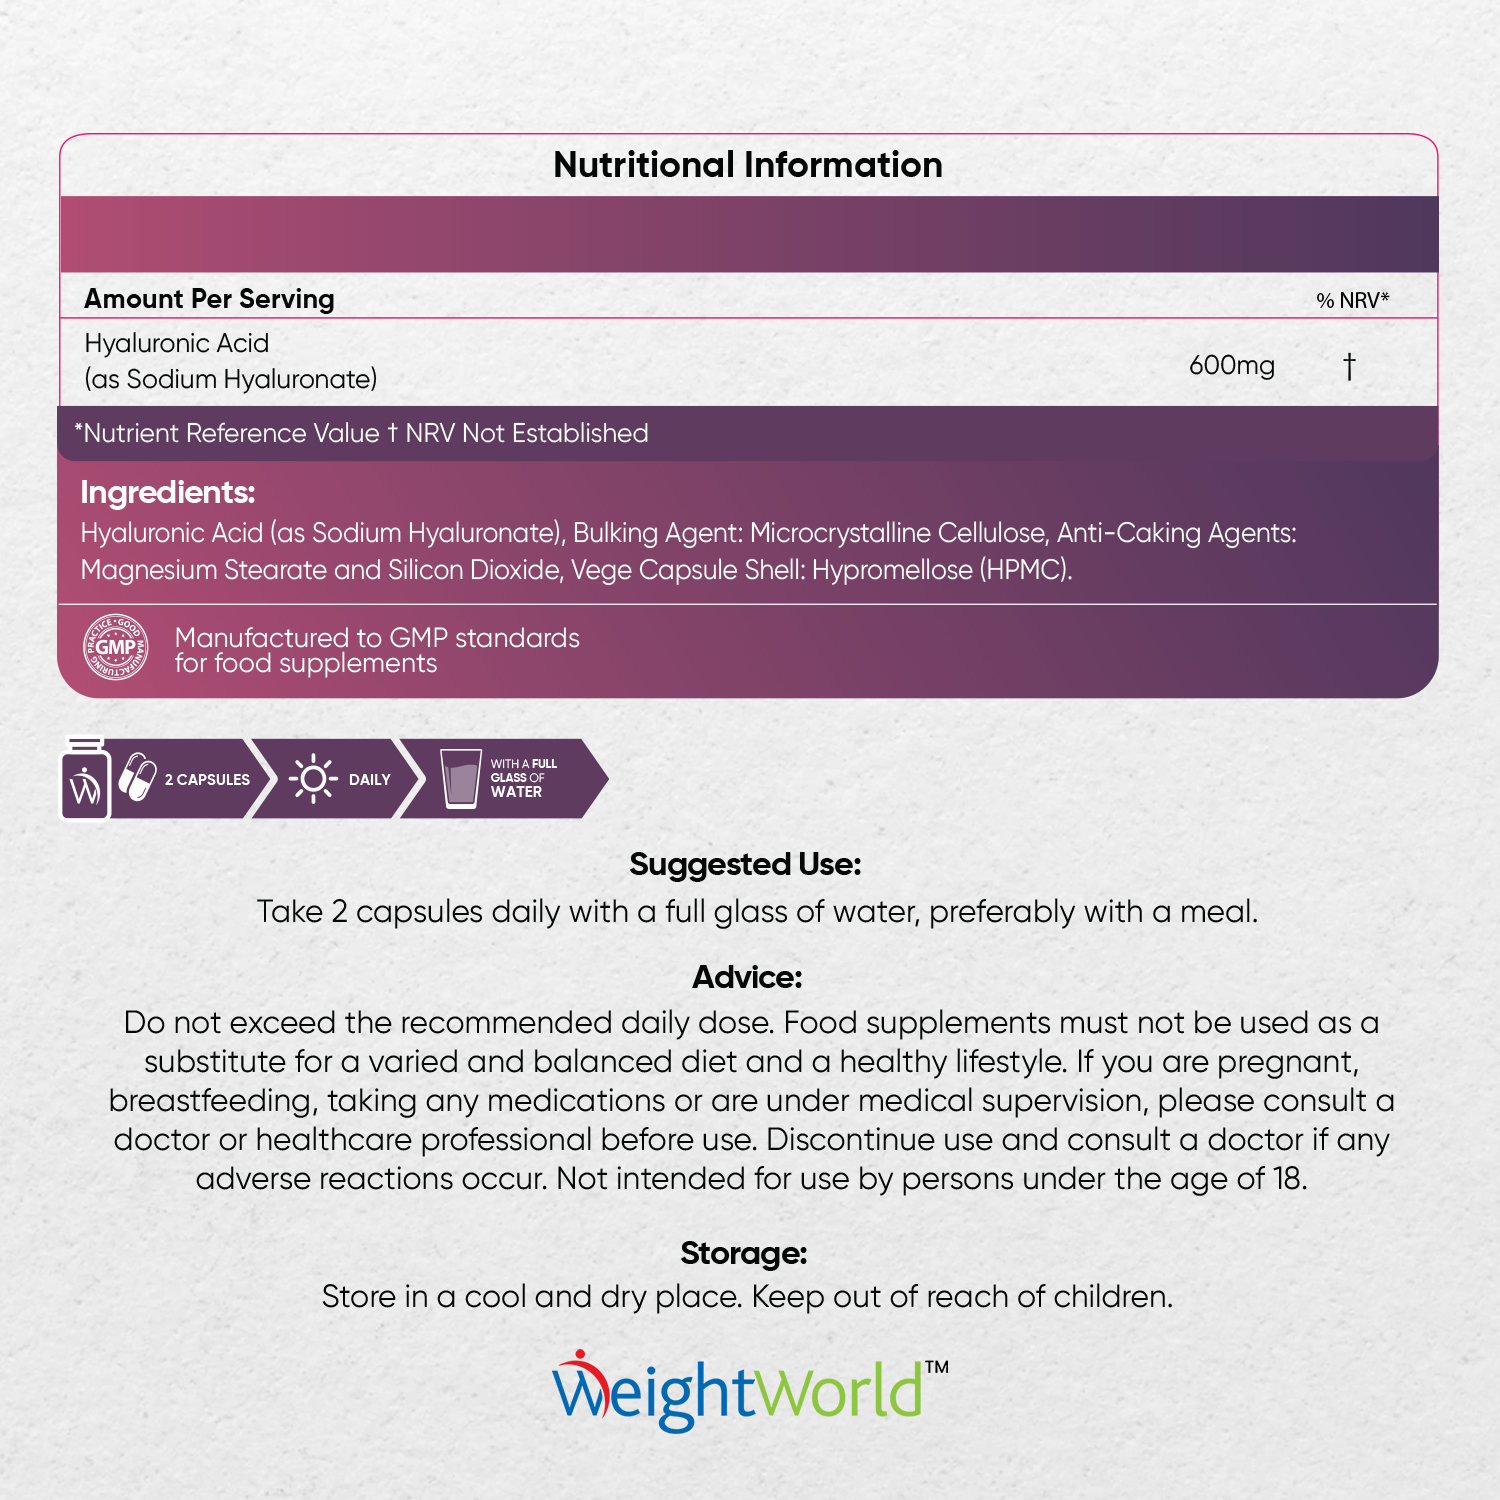 Hyaluronic Acid Capsules from EarthBiotics - Nutritional Information